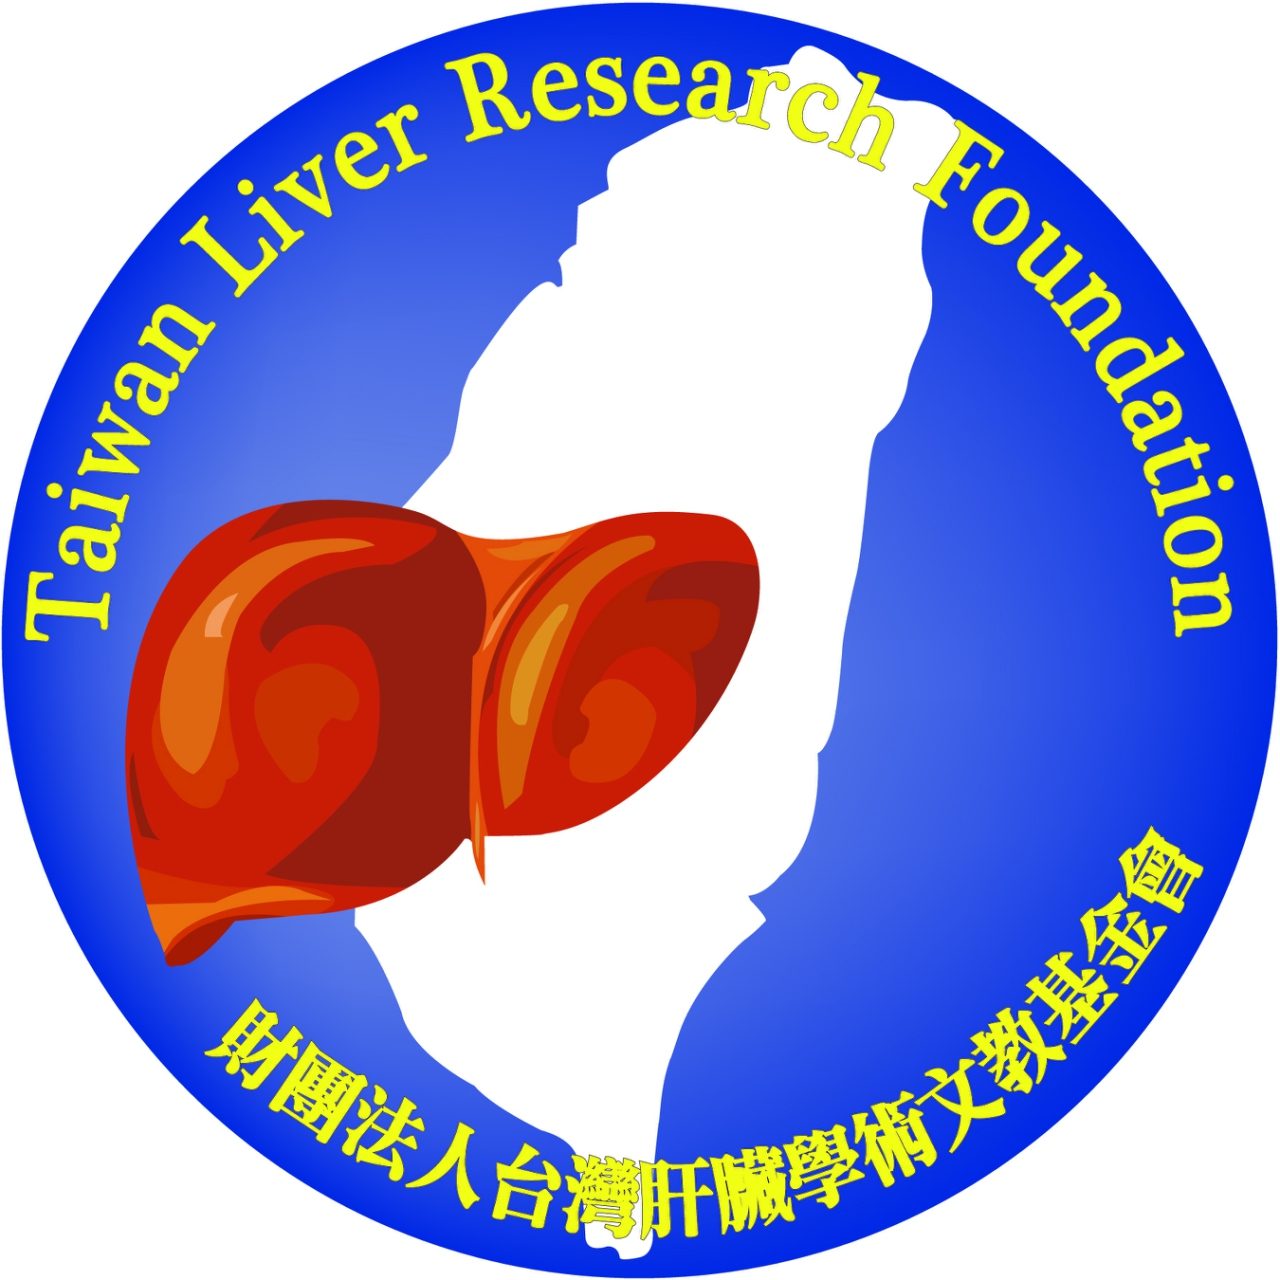 5. Taiwan Liver Research Foundation